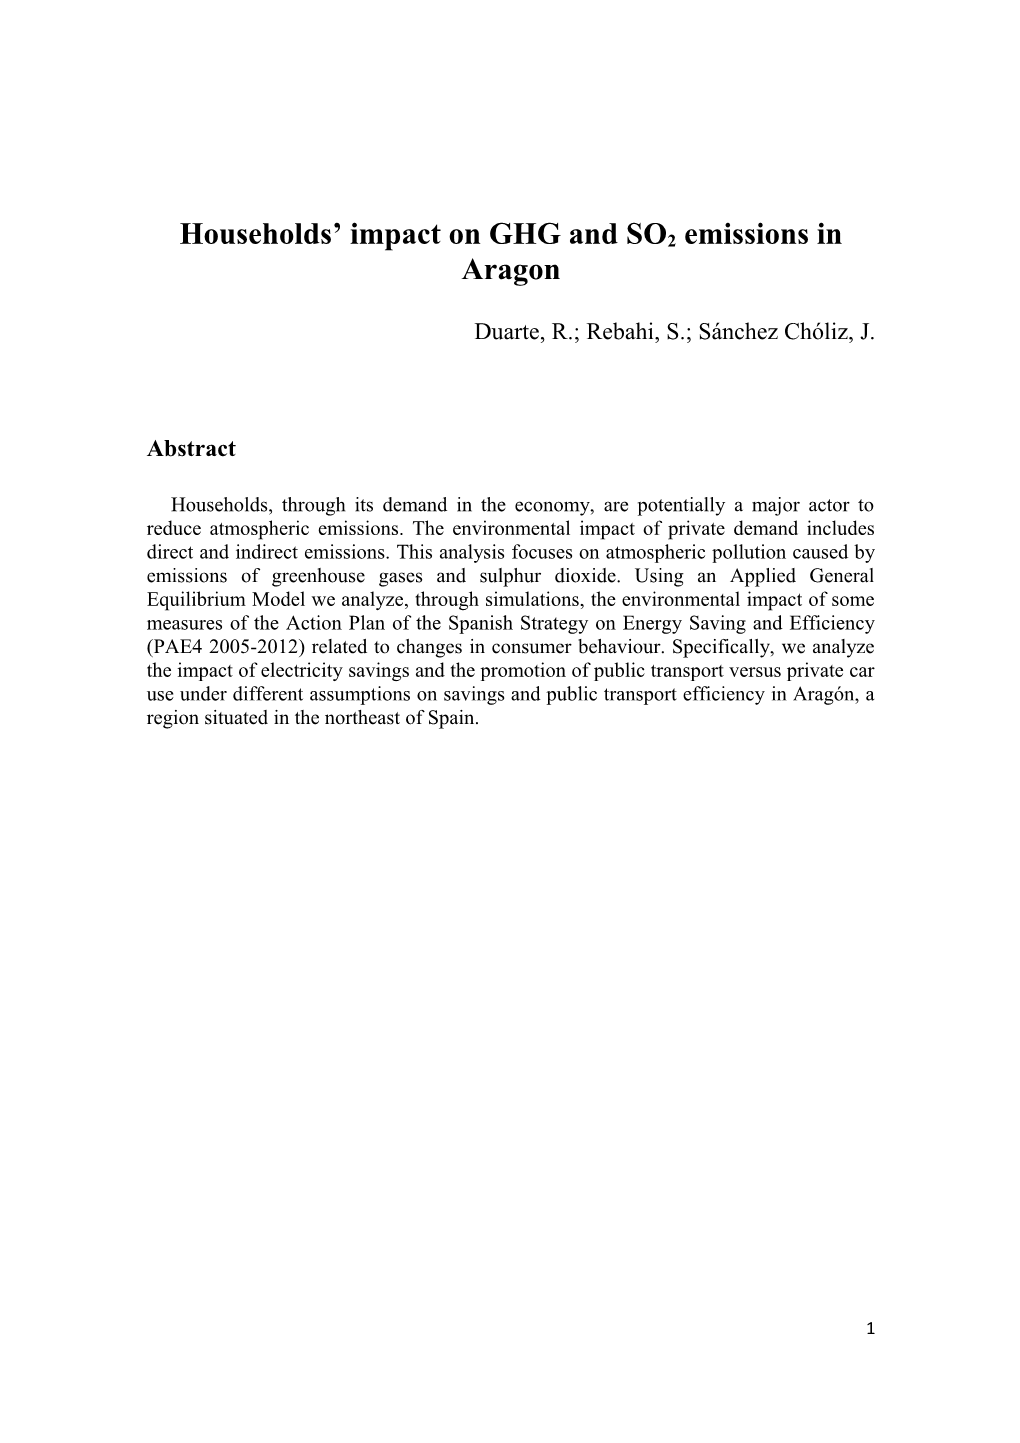 Households Impact on GHG and SO2 Emissions in Aragon